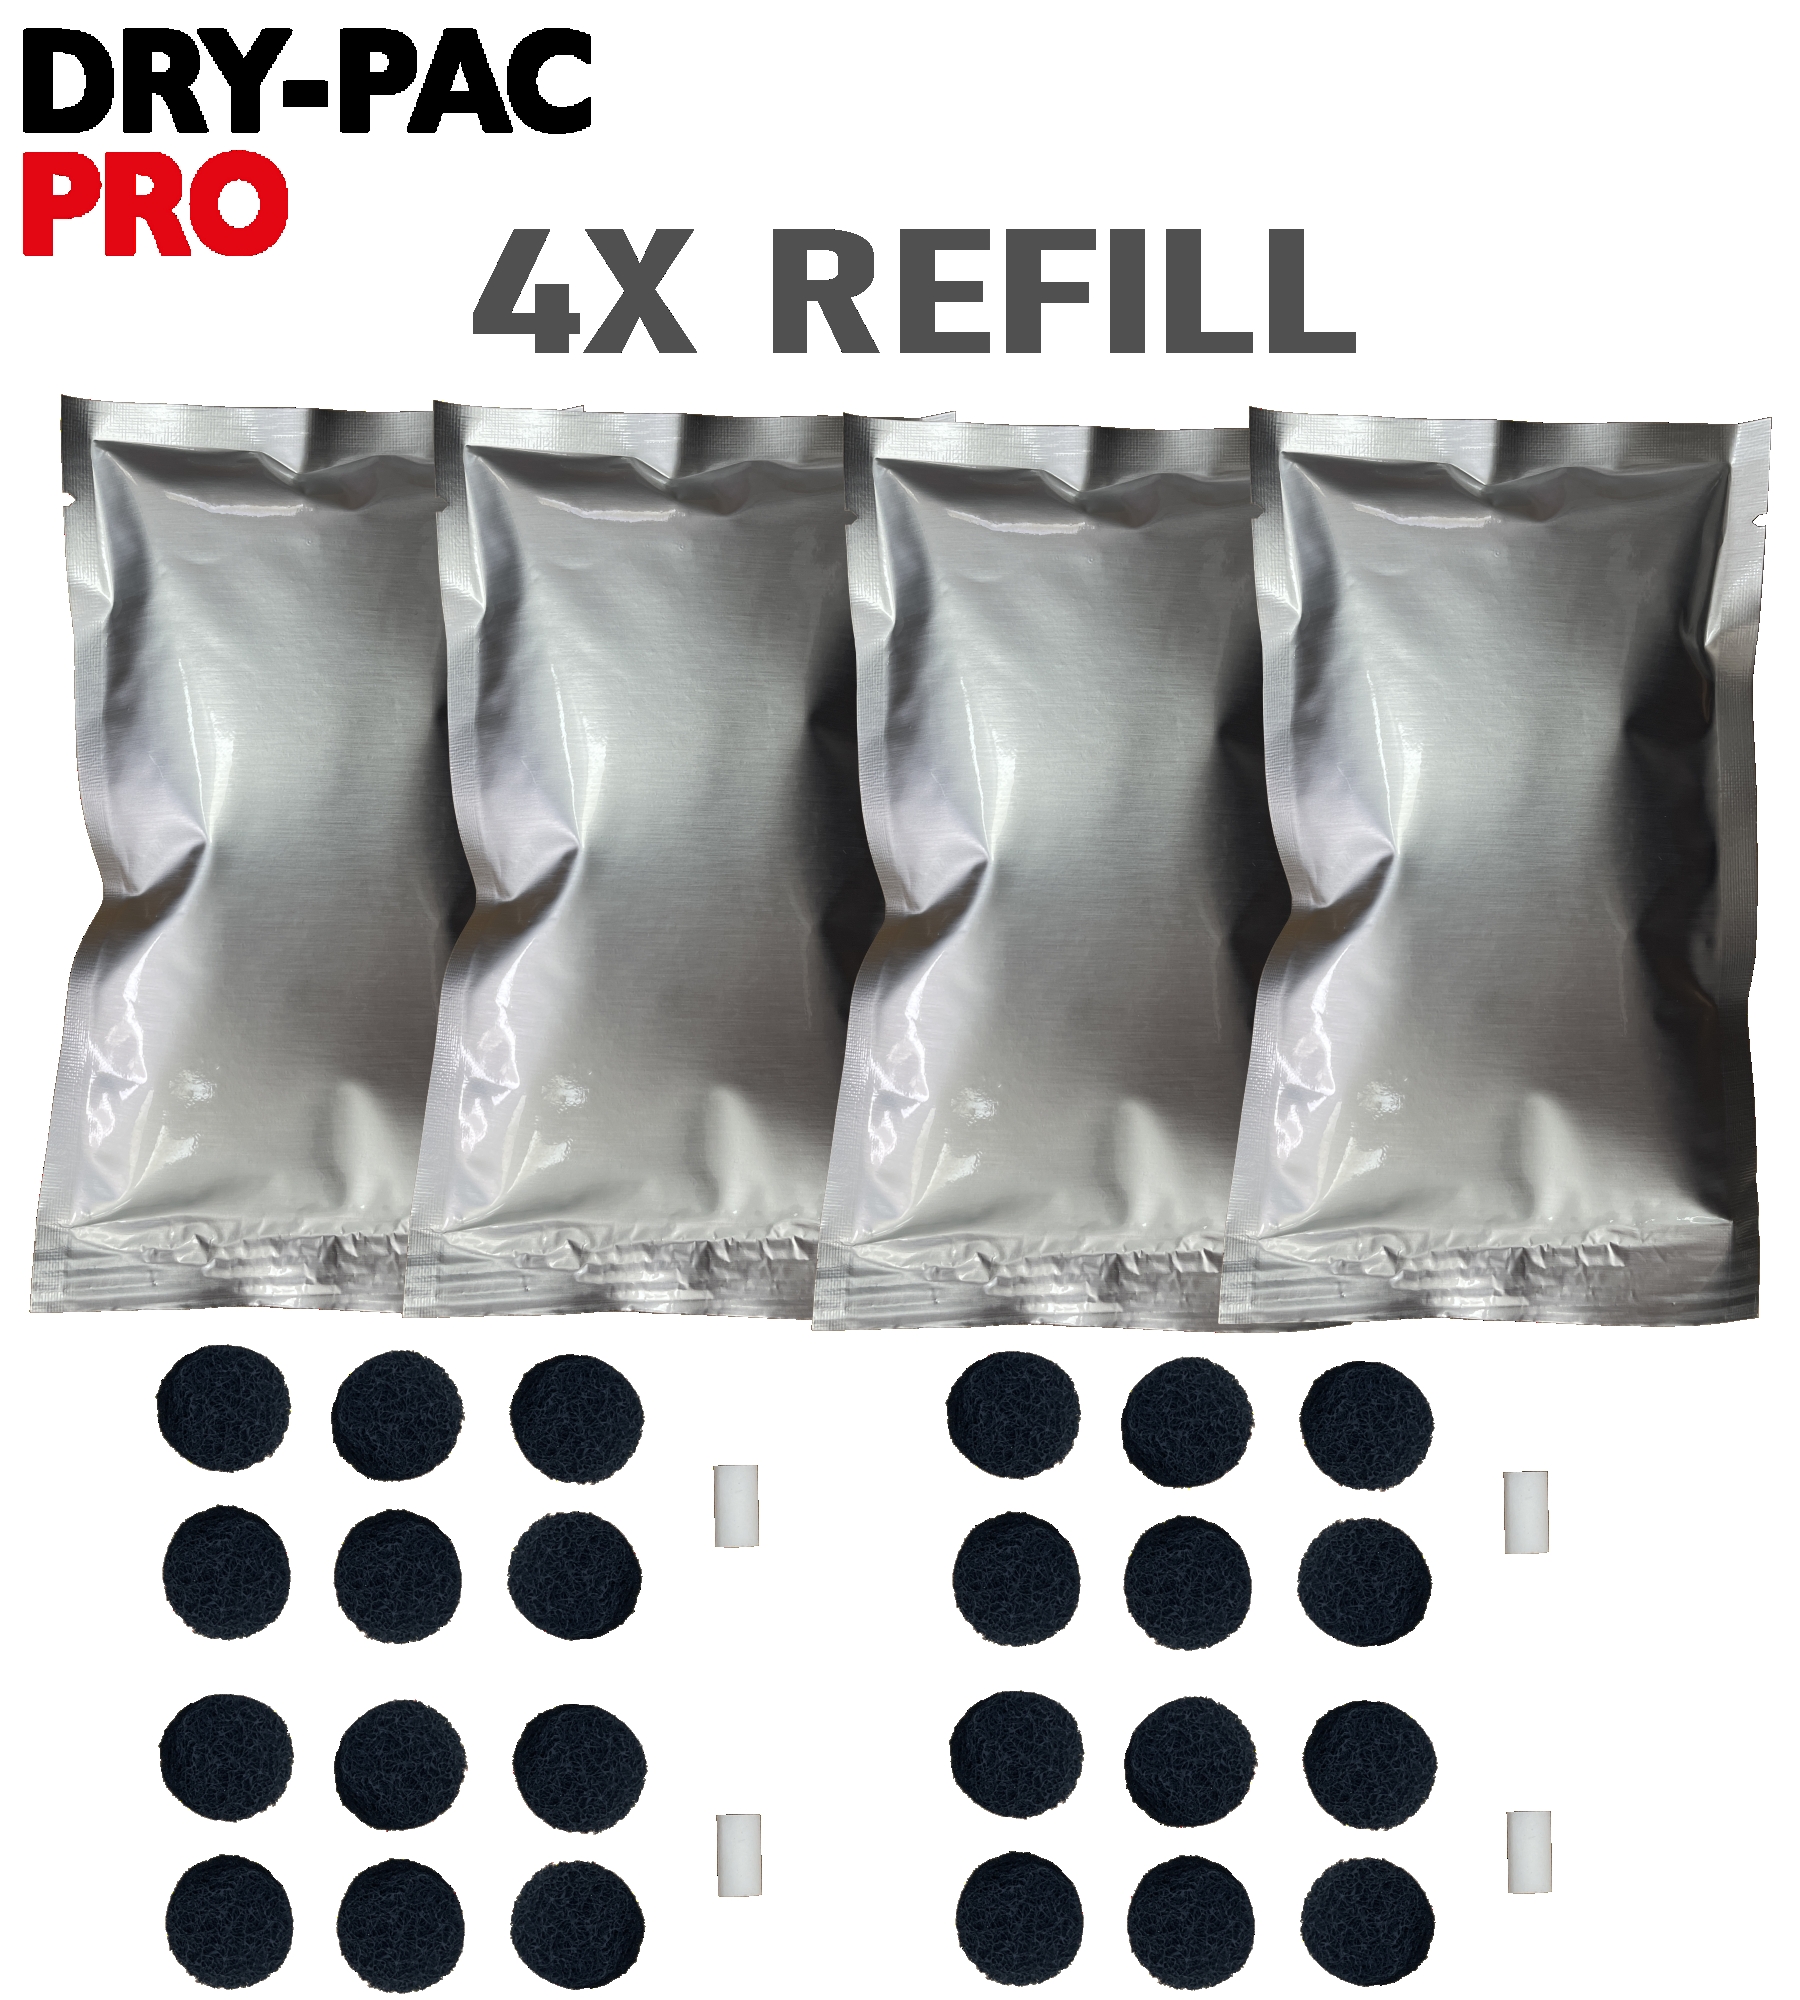 Dry-Pac Pro Refill Pack Kit - Pack of 4